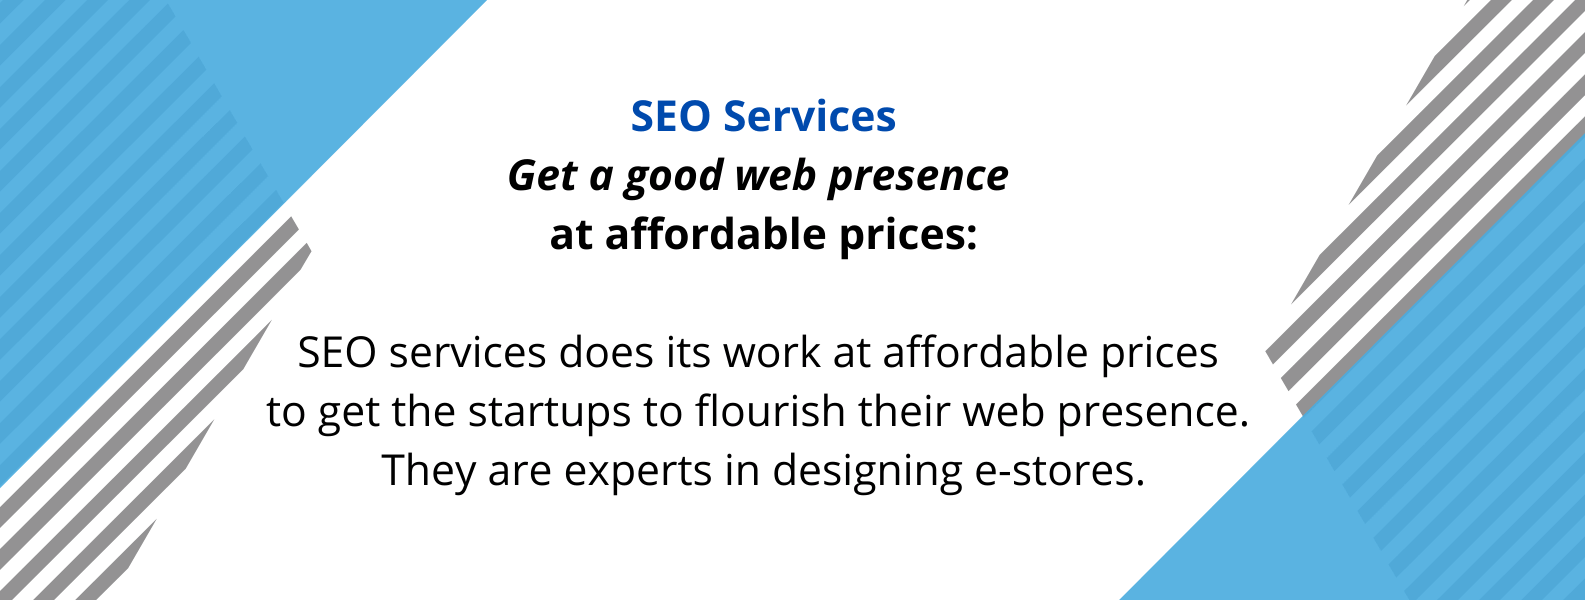 SEO Services - the top SEO agency in AUstralia with it’s unique selling features.